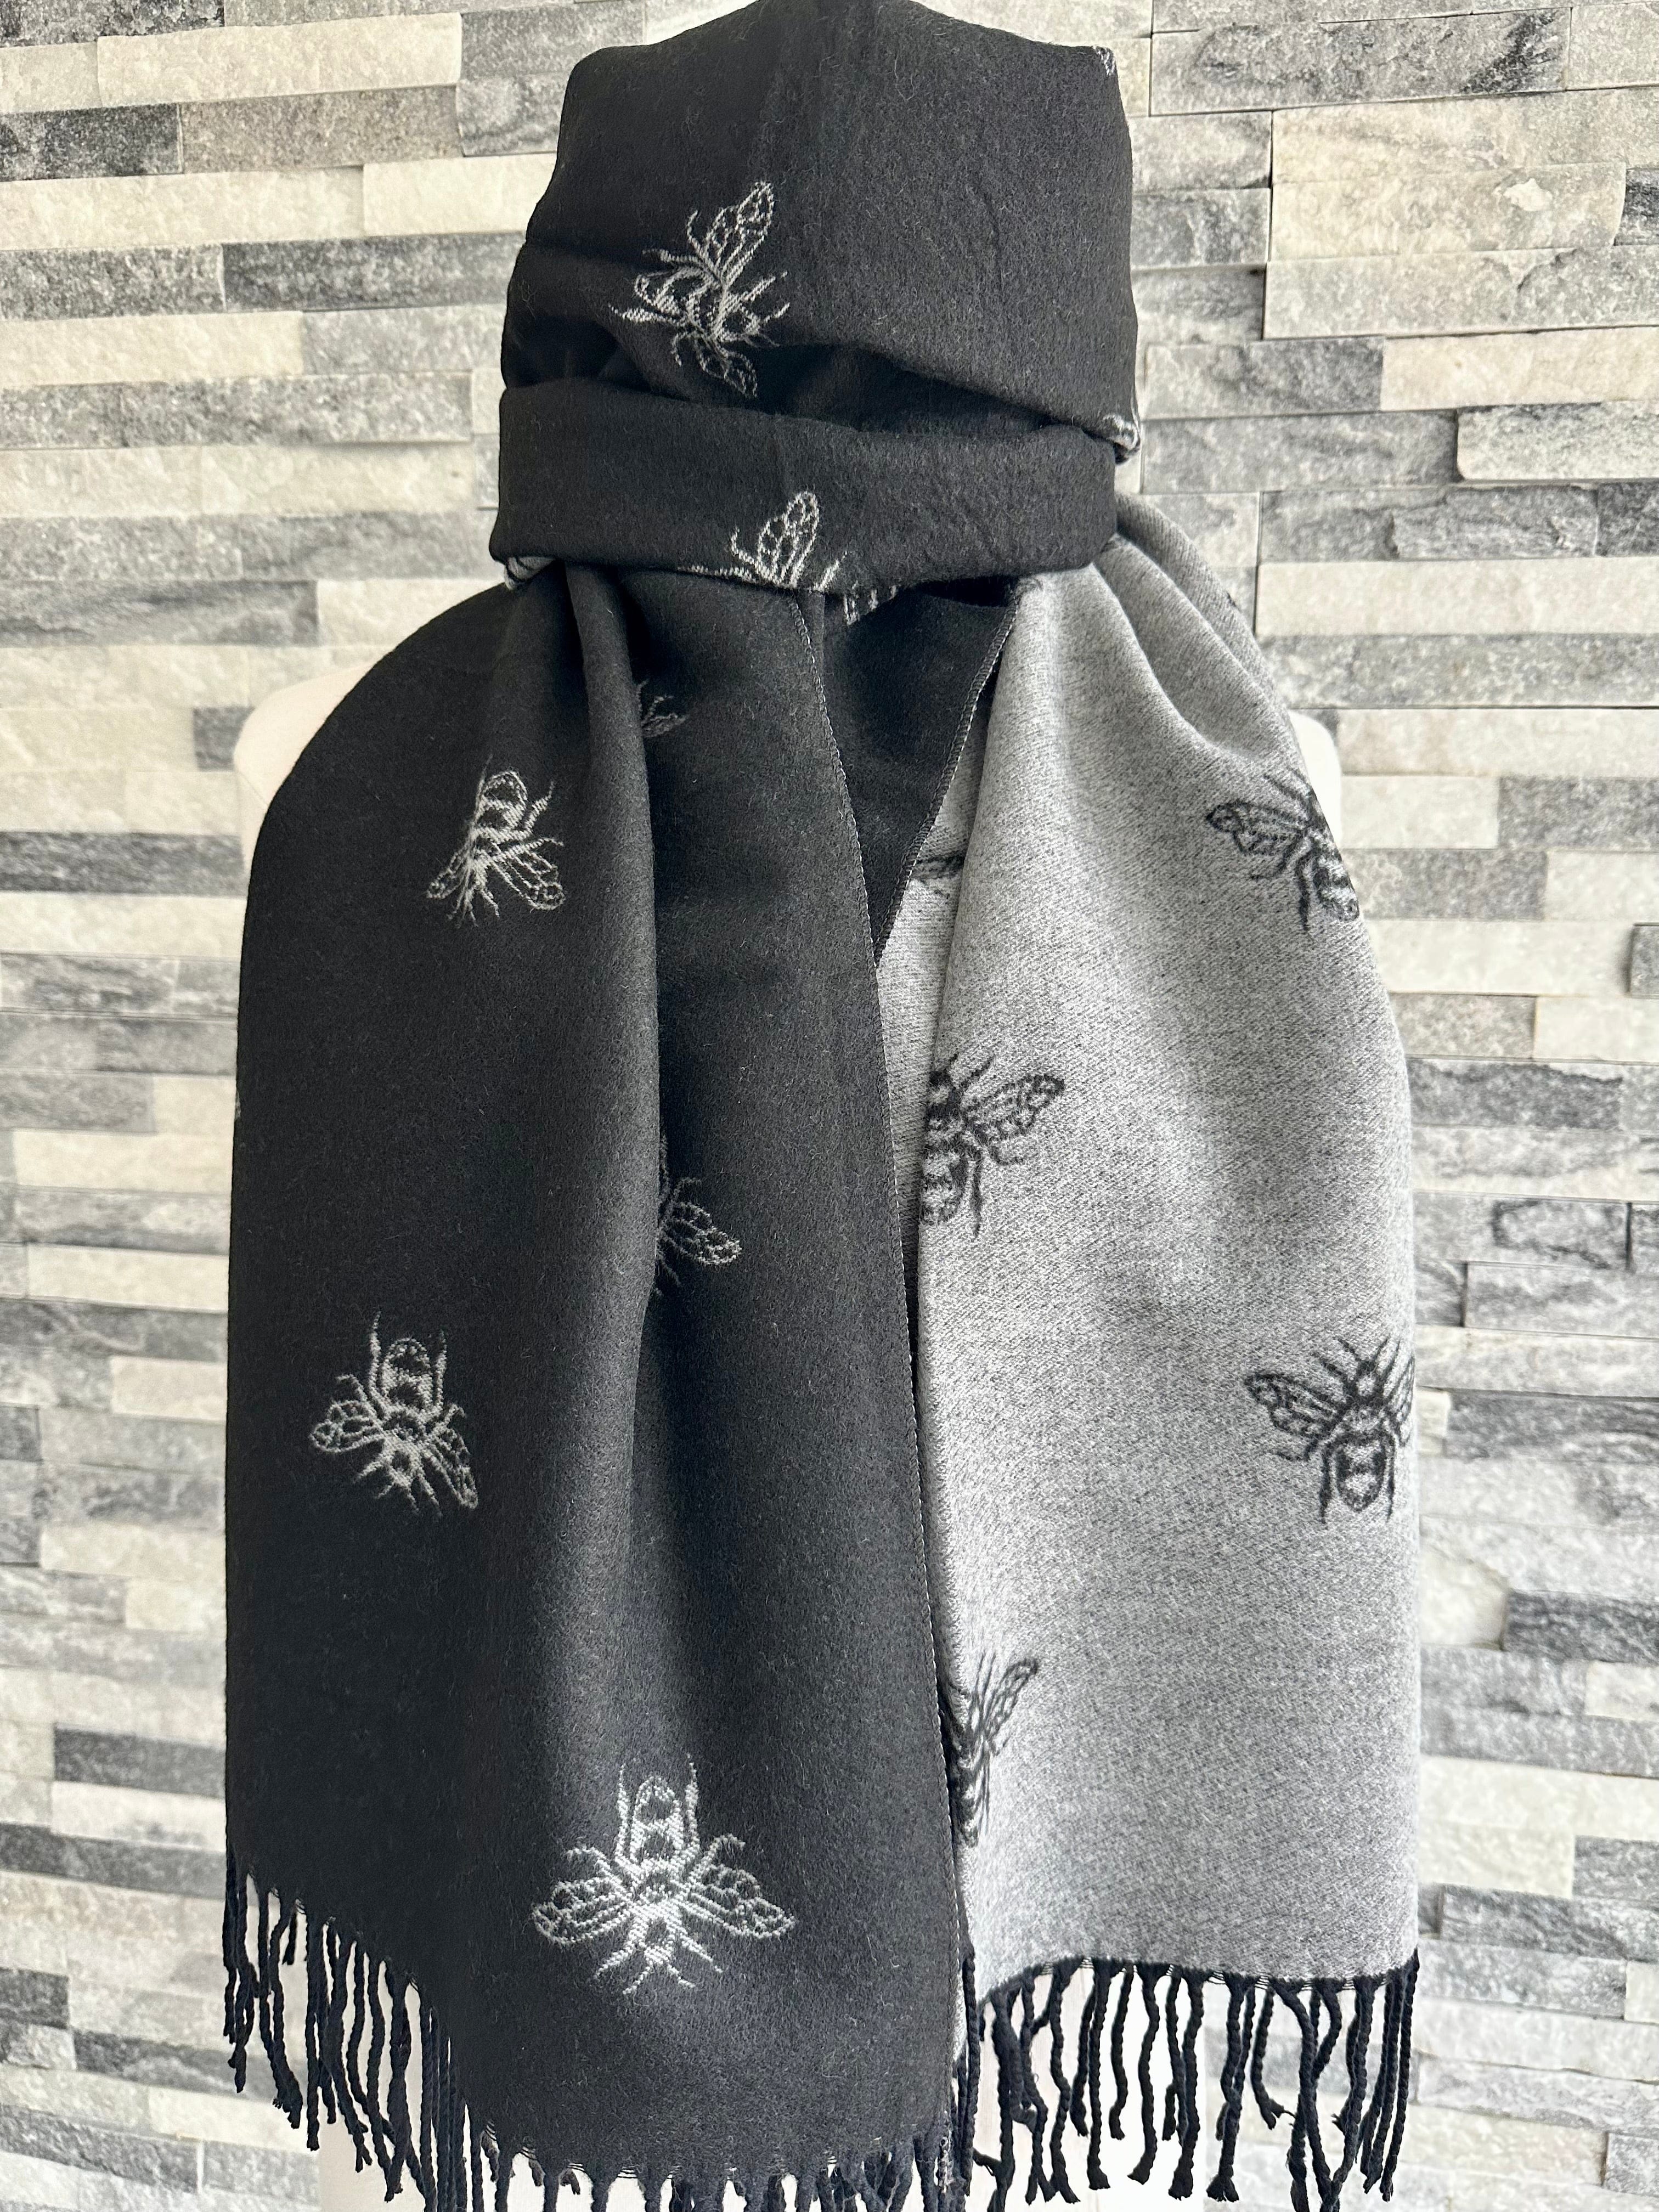 lusciousscarves Black and Grey Reversible Bees Scarf / Wrap , Cashmere Blend